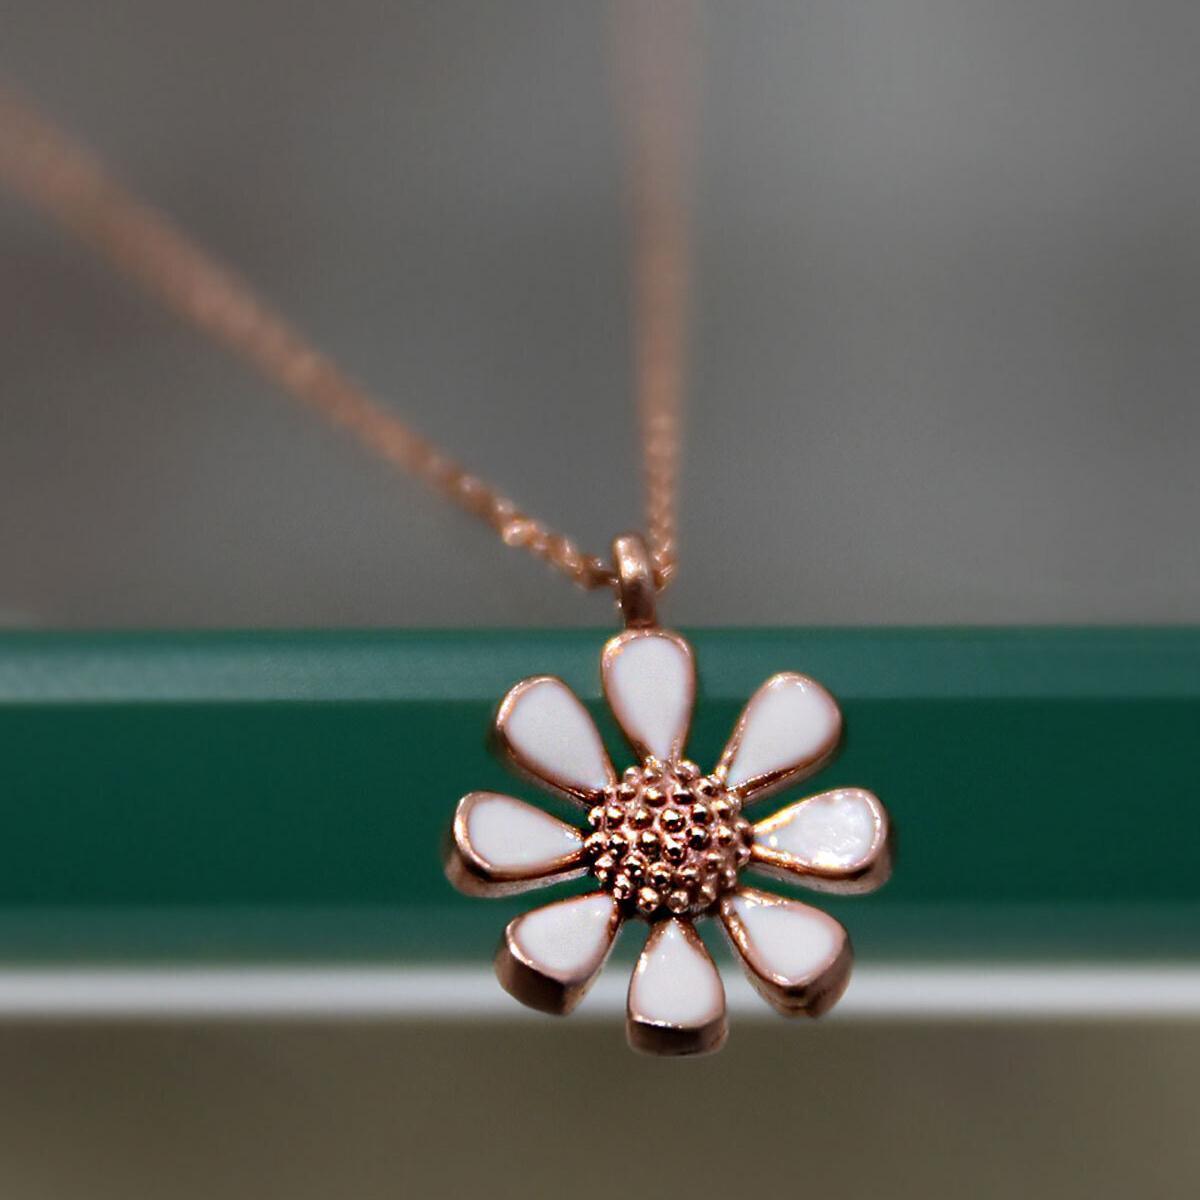 Daisy Flower Necklace • Daisy Pendant Necklace • Daisy Choker Necklace - Trending Silver Gifts